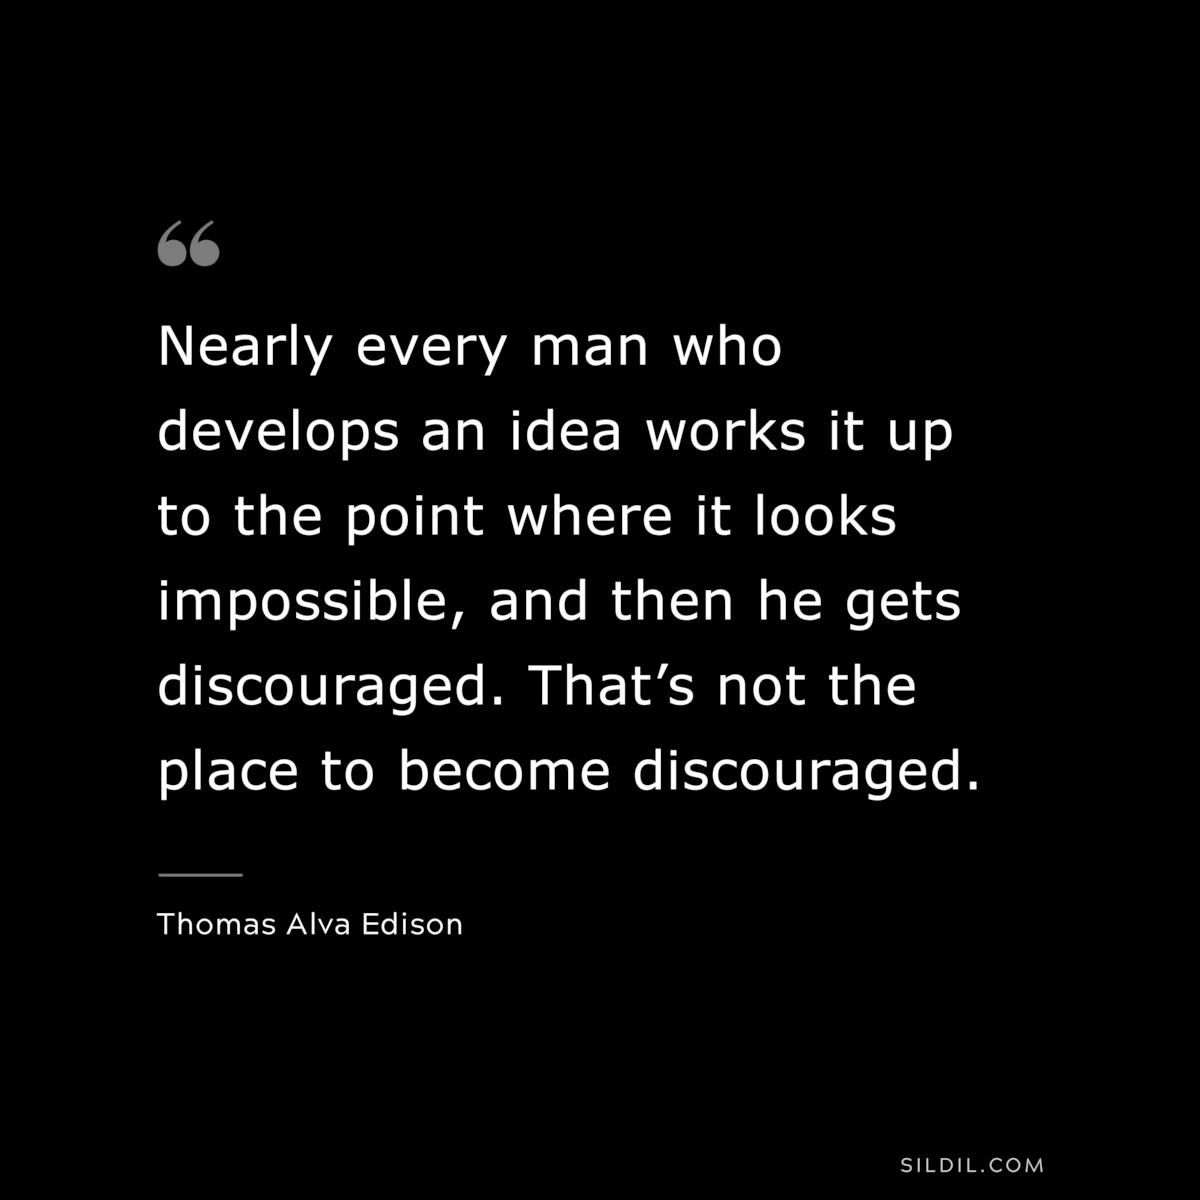 Nearly every man who develops an idea works it up to the point where it looks impossible, and then he gets discouraged. That’s not the place to become discouraged. ― Thomas Alva Edison